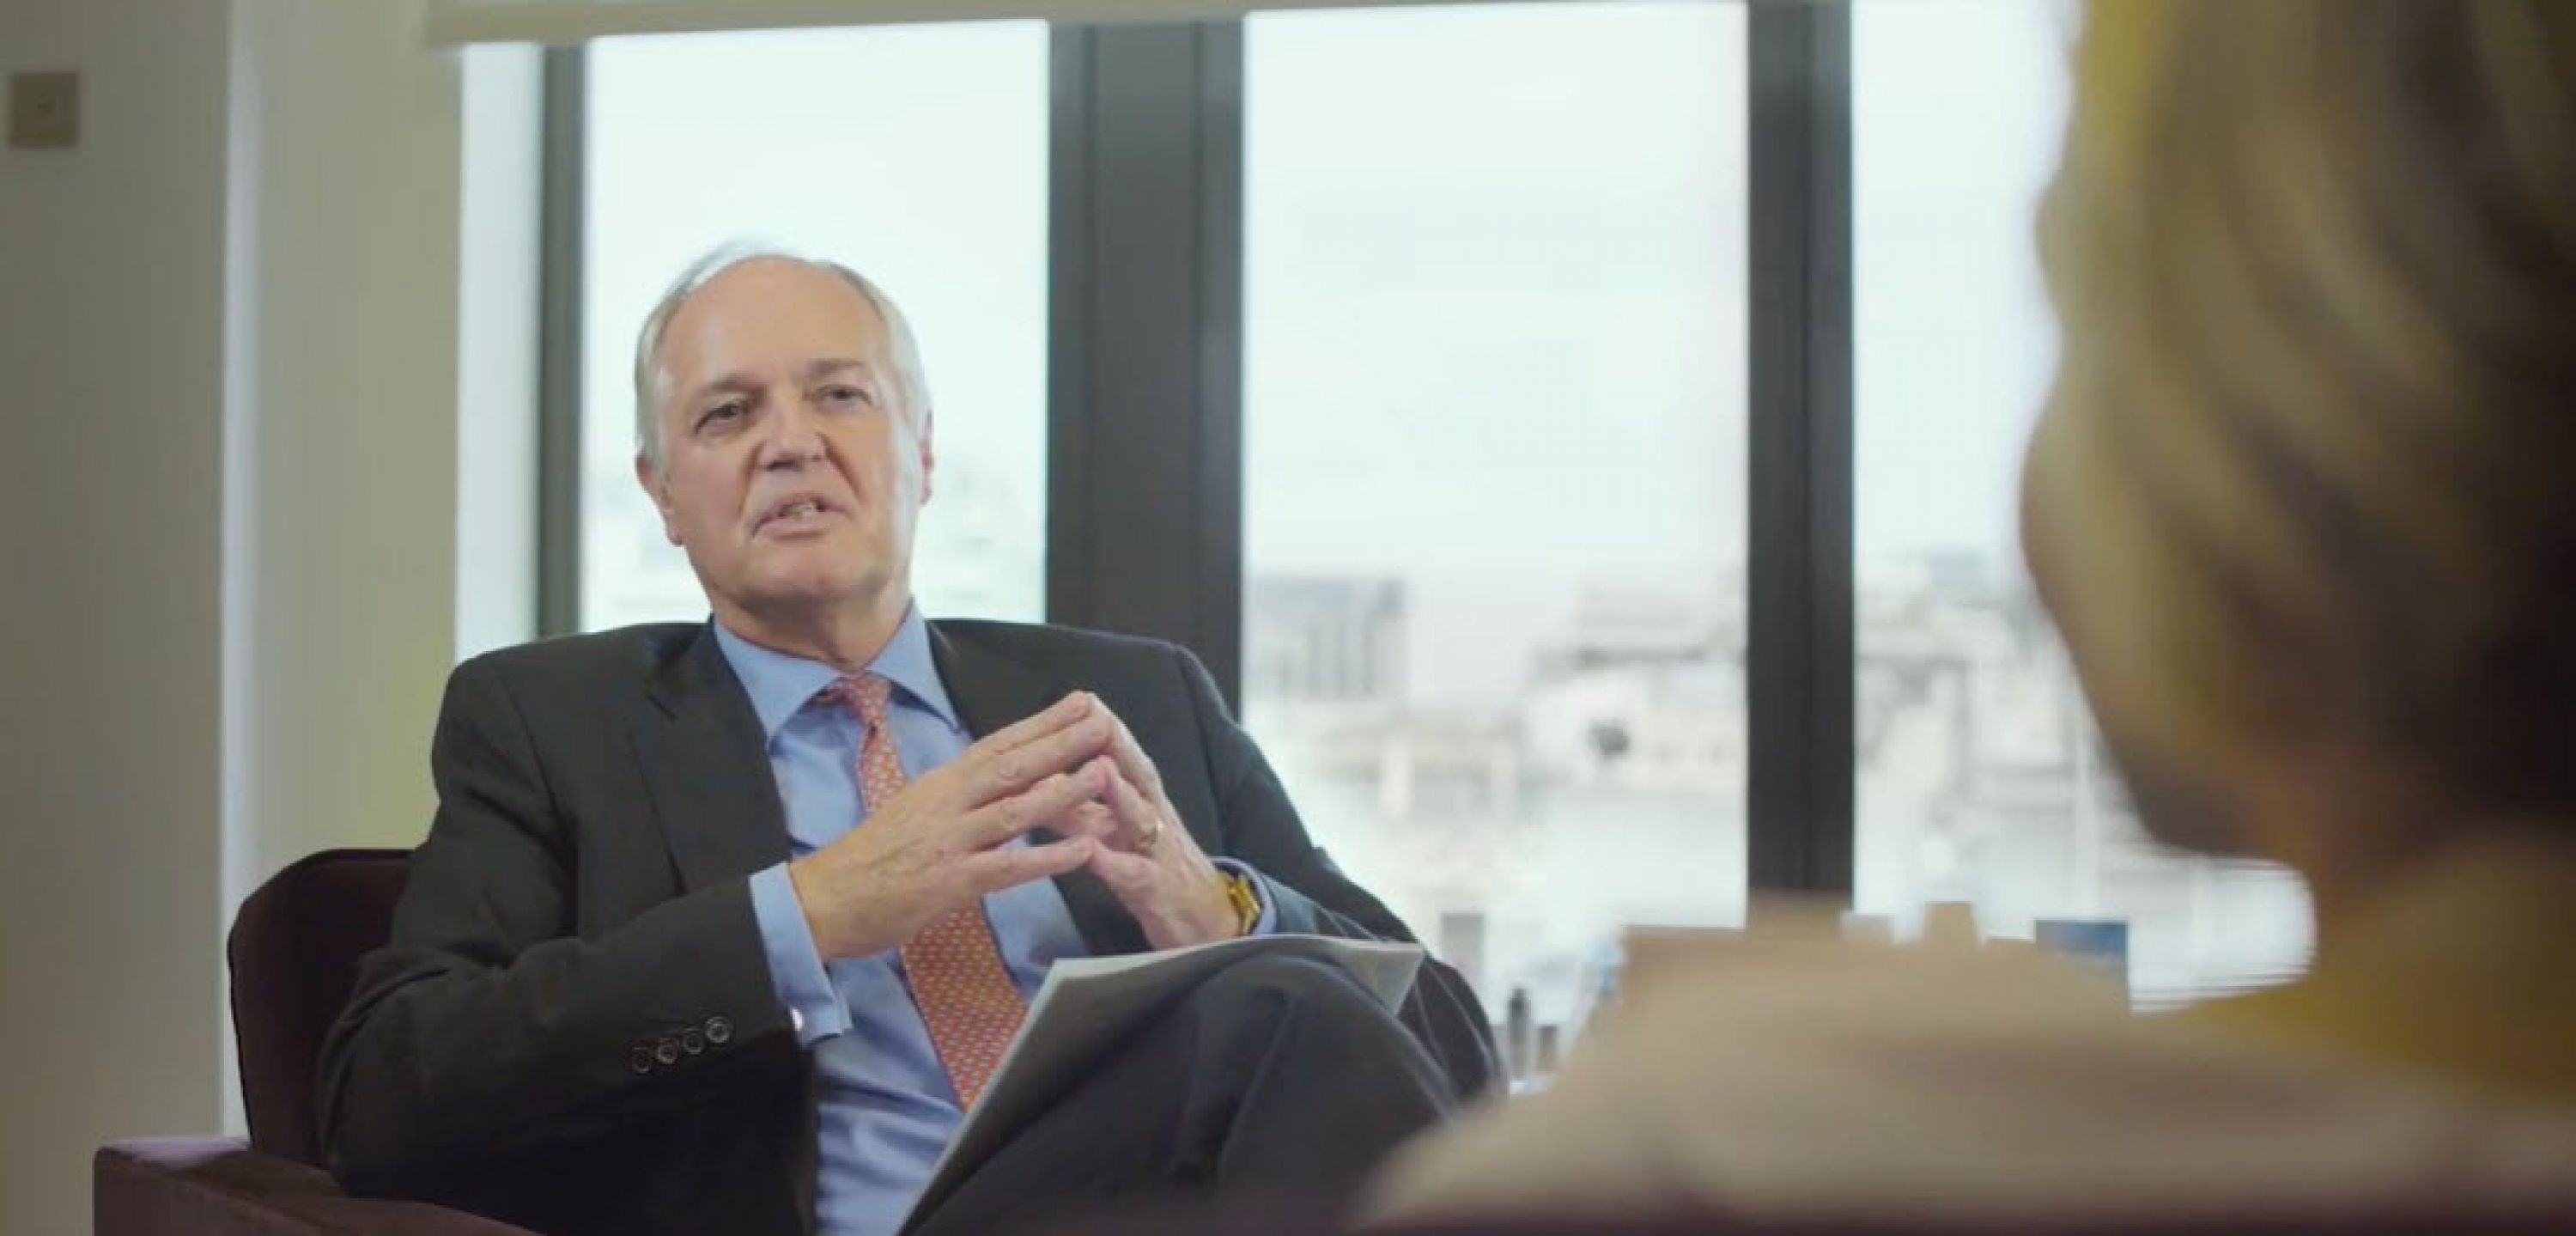 Paul Polman on Corporate's Role in Society